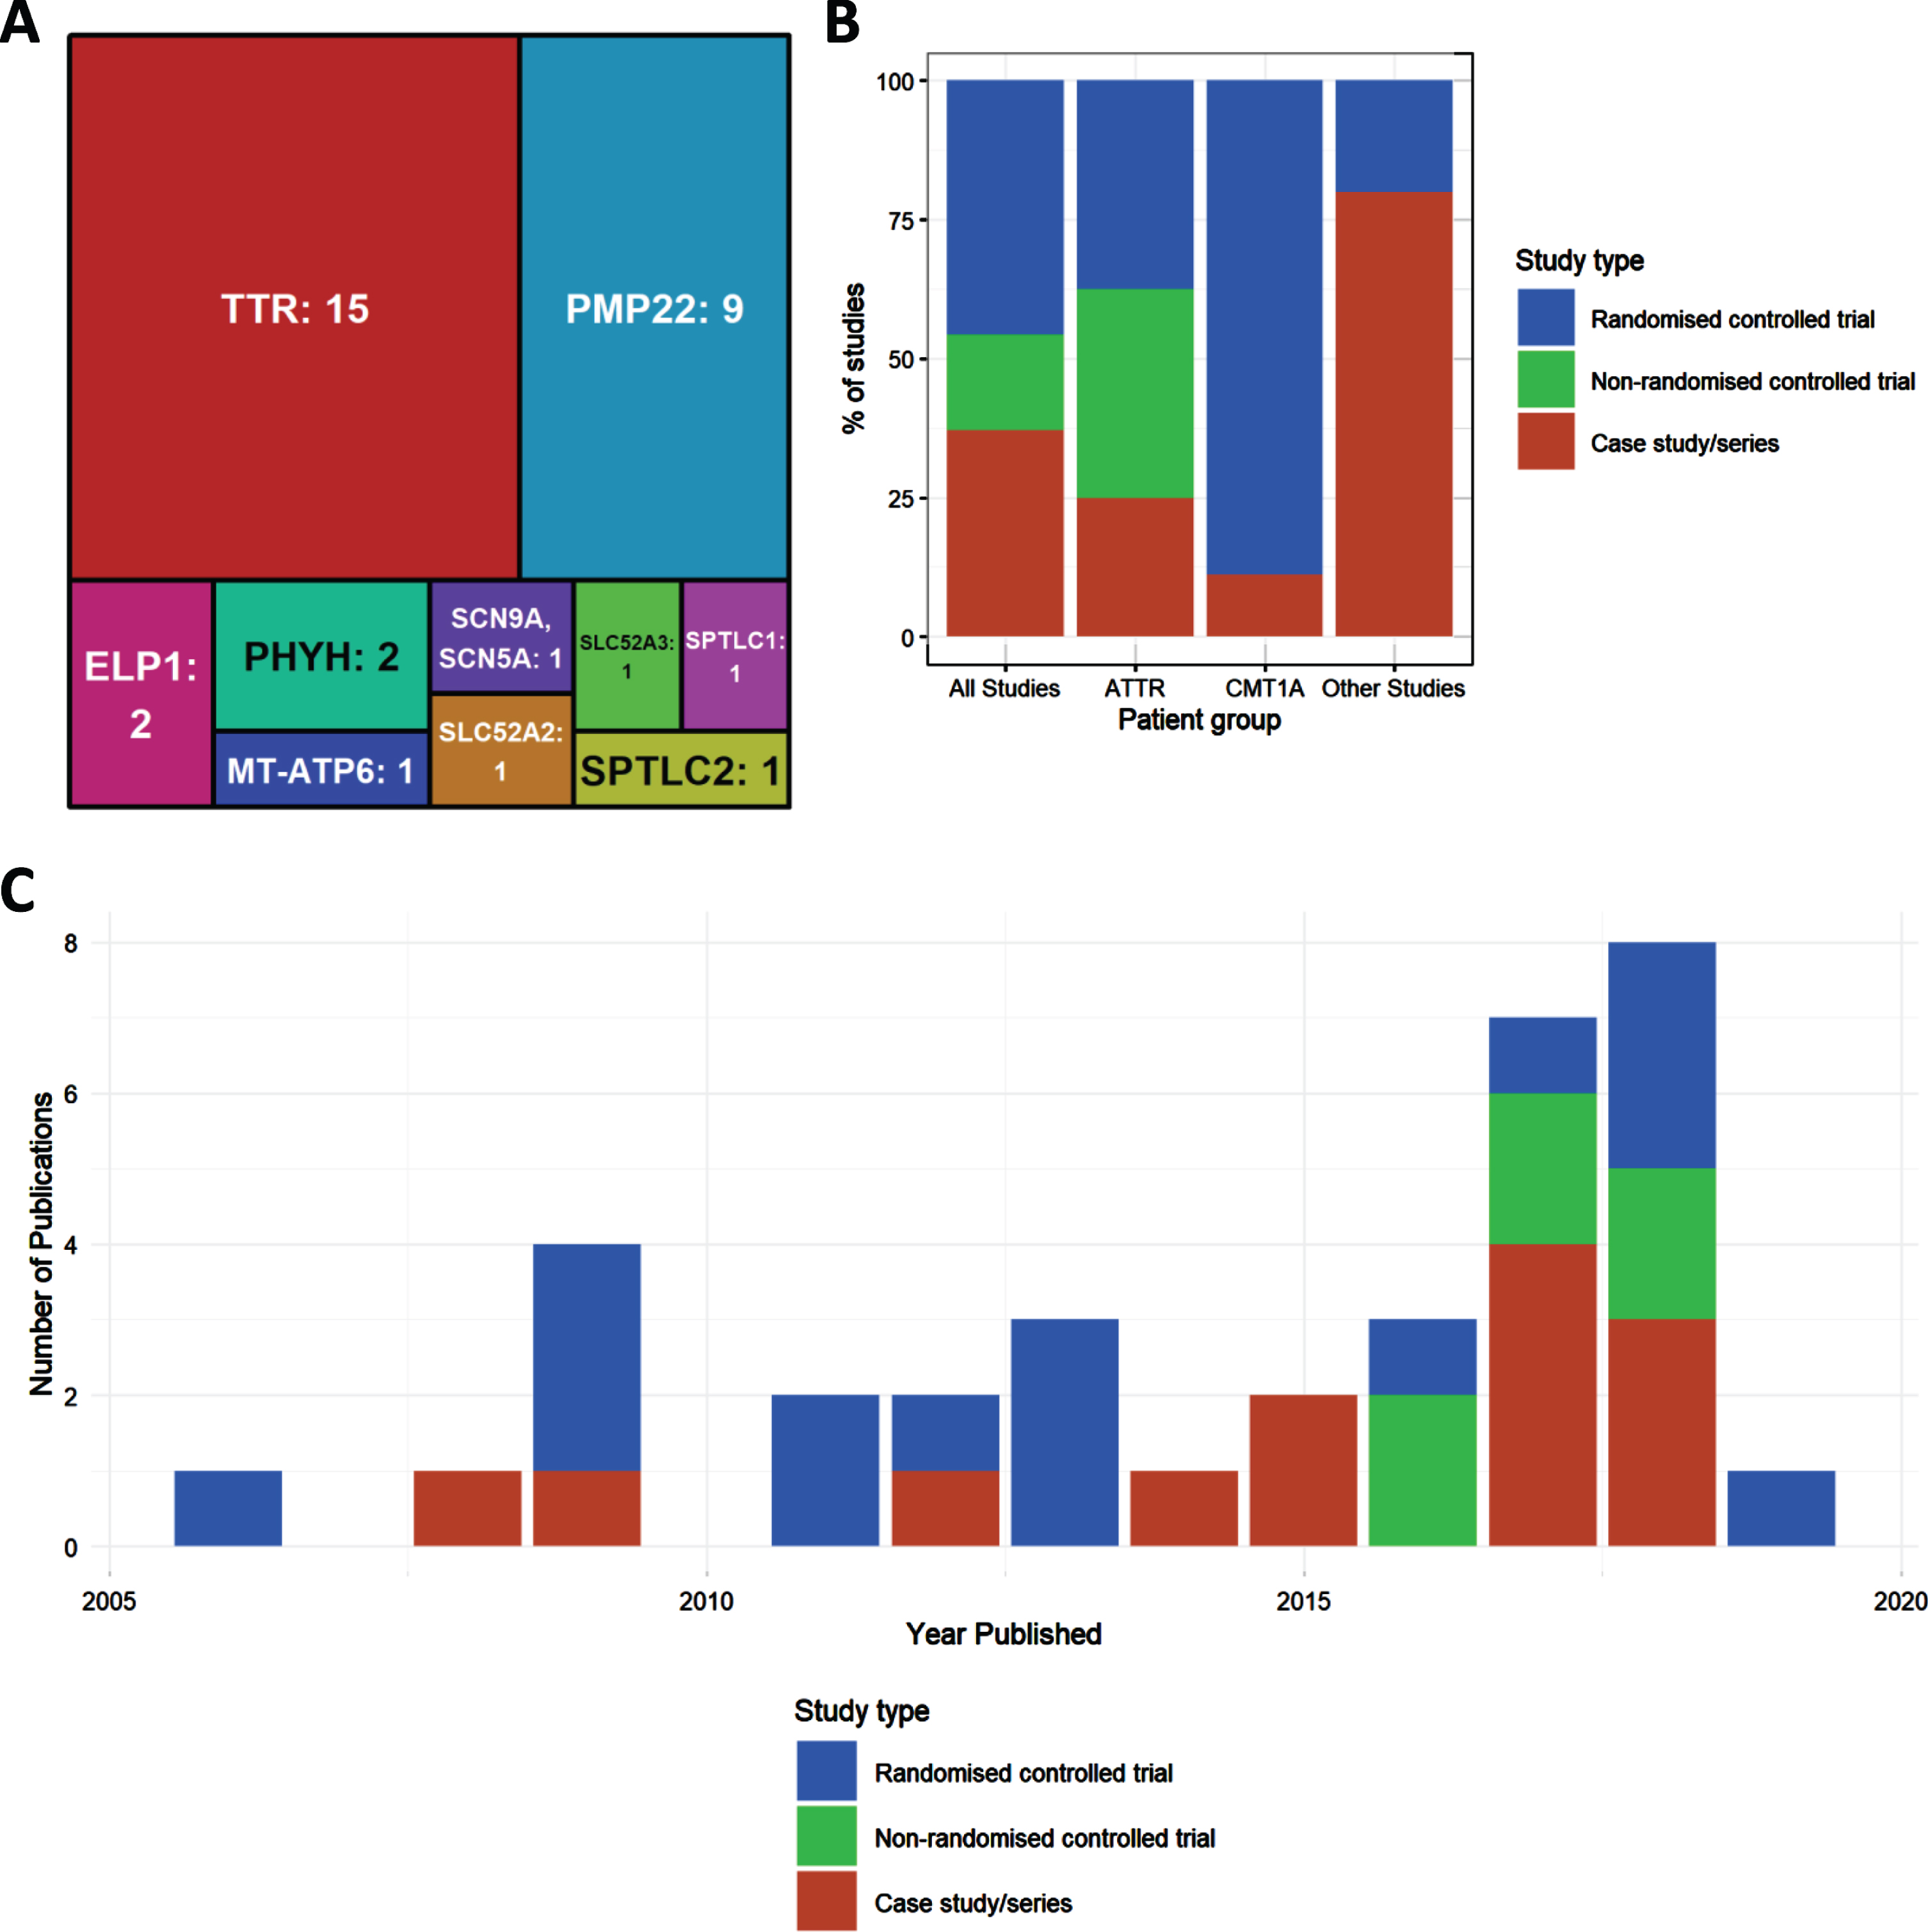 Characteristics of included studies. (A) Treemap showing number of studies by mutated gene. (B) Percentages of study type for studies overall, and then broken down by disease type (amyloid TTR neuropathy, ATTR; Charcot-Marie-Tooth type 1A, CMT1A; all other studies). (C) Distribution of publications by year, colours indicating study types.